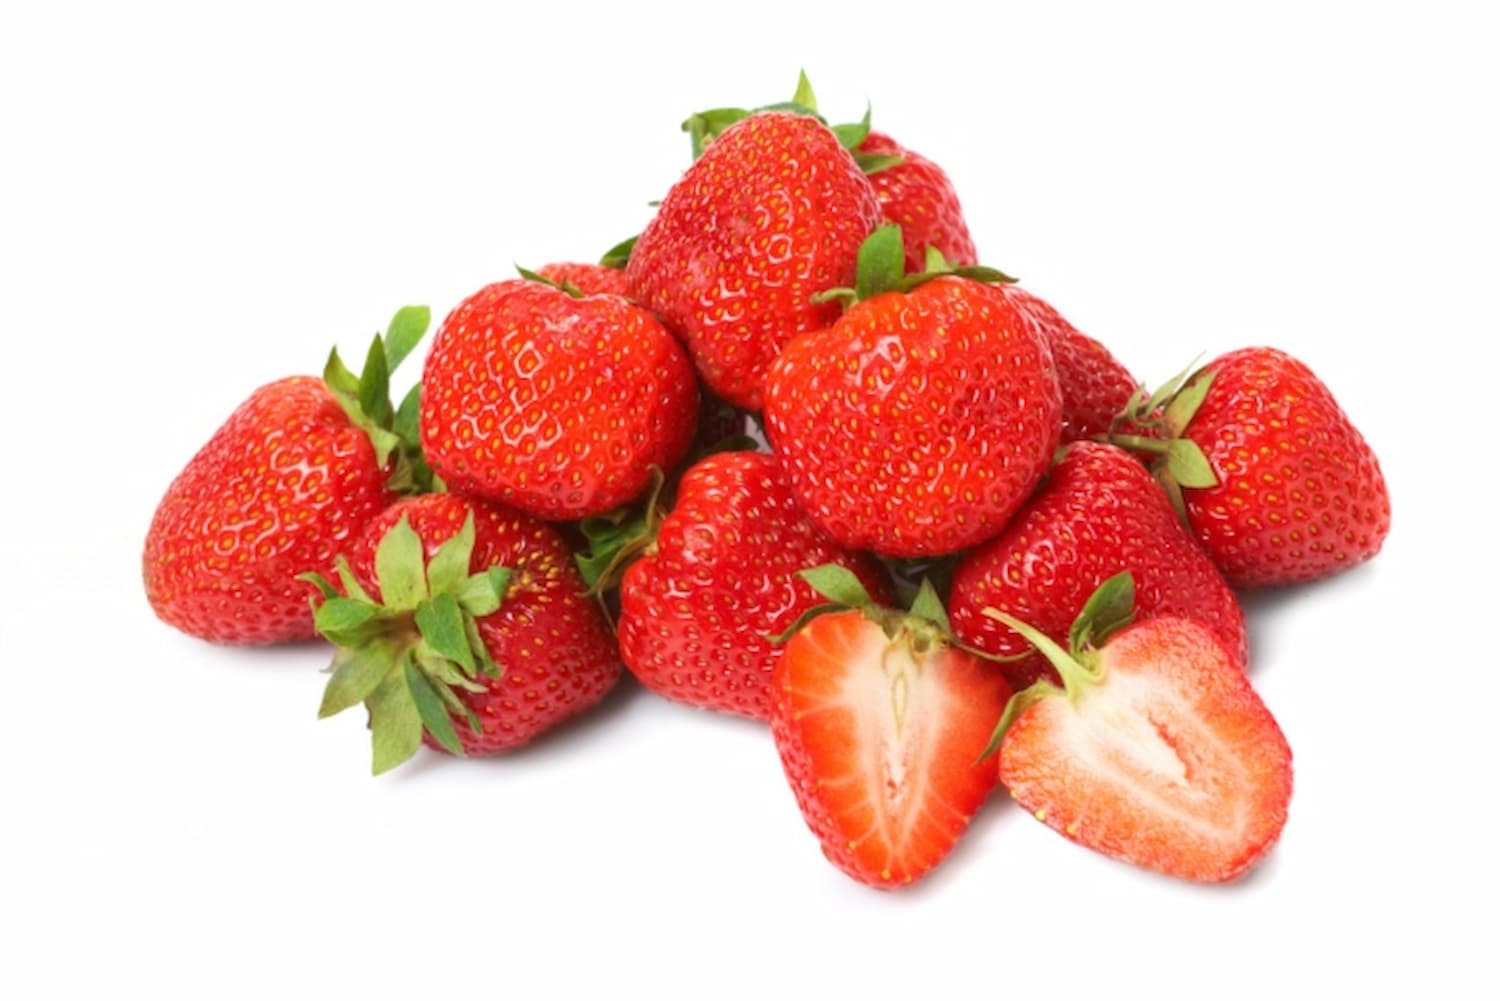 New Study Shows Strawberries May Help Reduce Harm from Alcohol